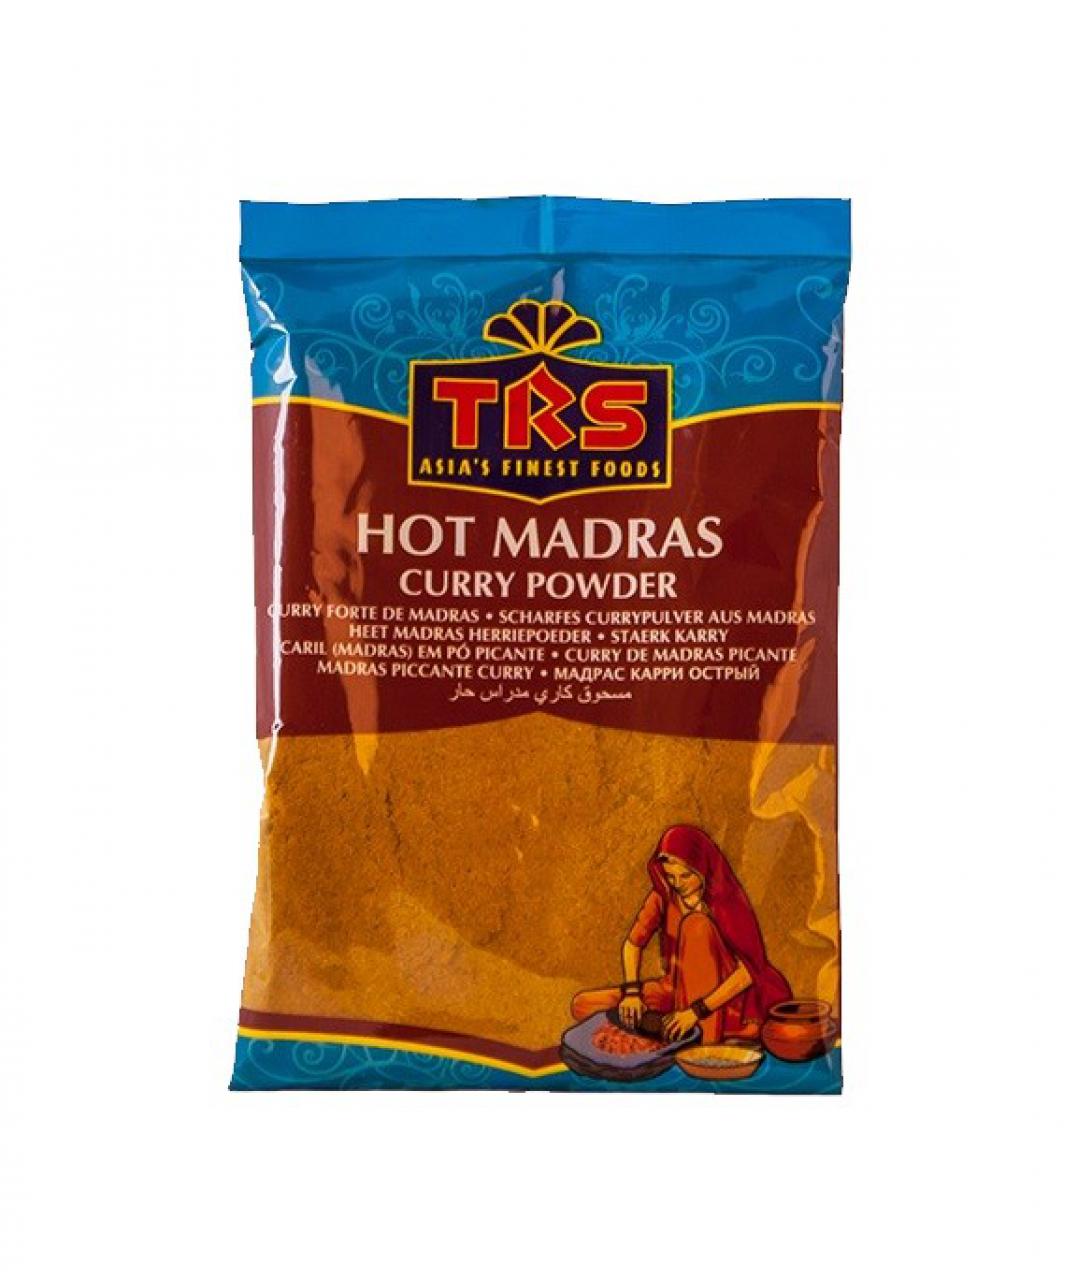 CURRY PWD HOT